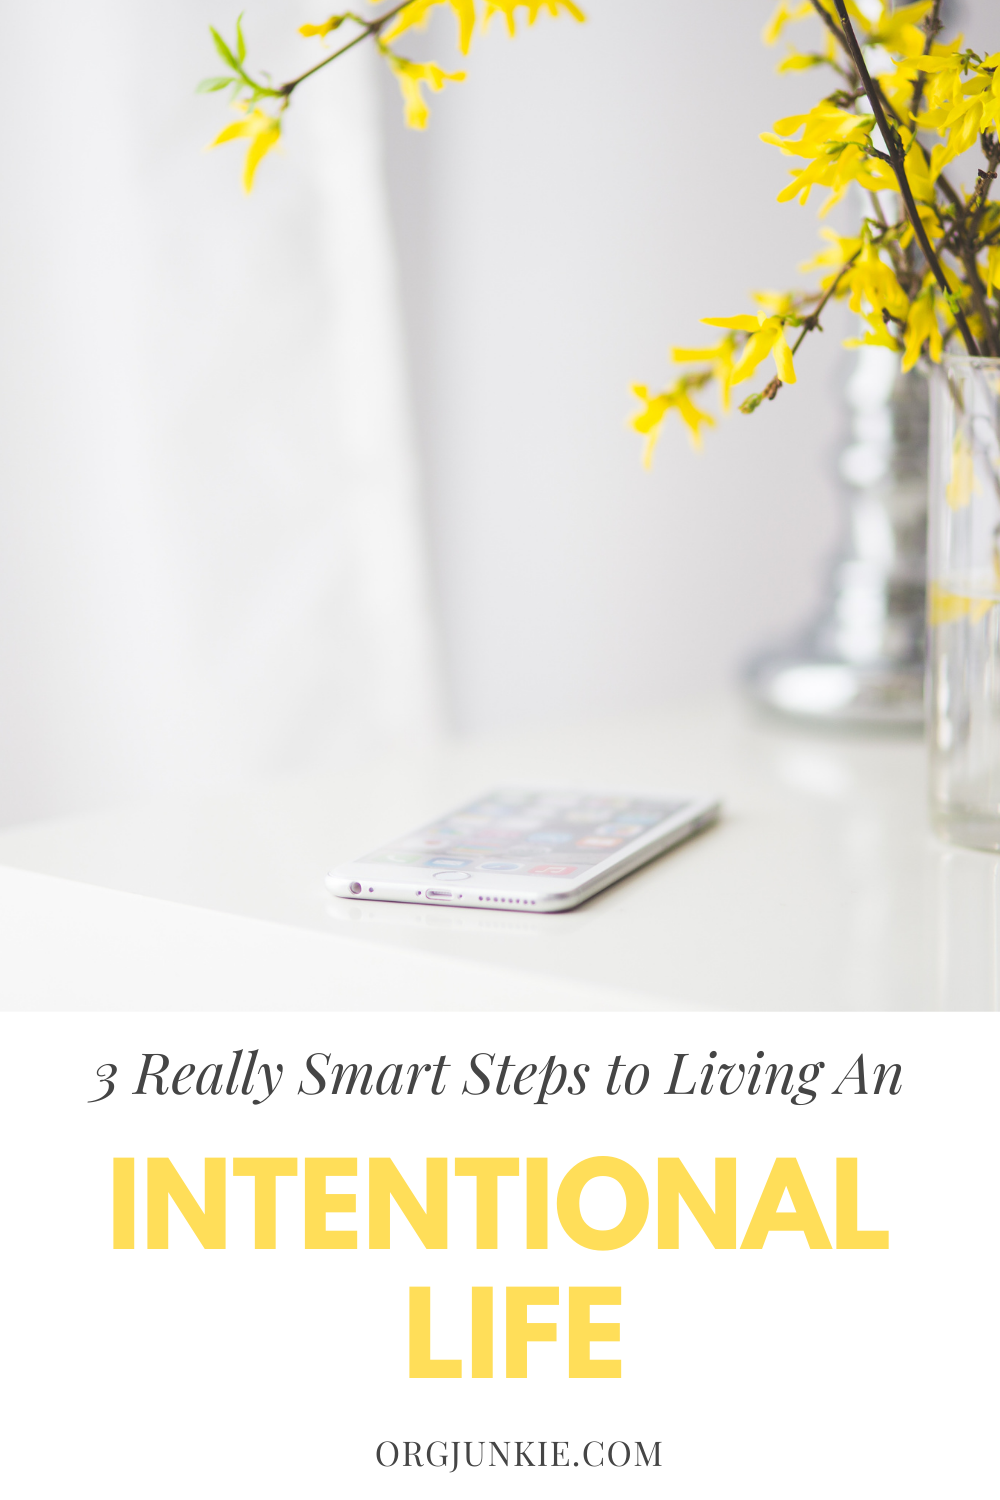 Three Really Smart Steps to Living an Intentional Life at I'm an Organizing Junkie blog